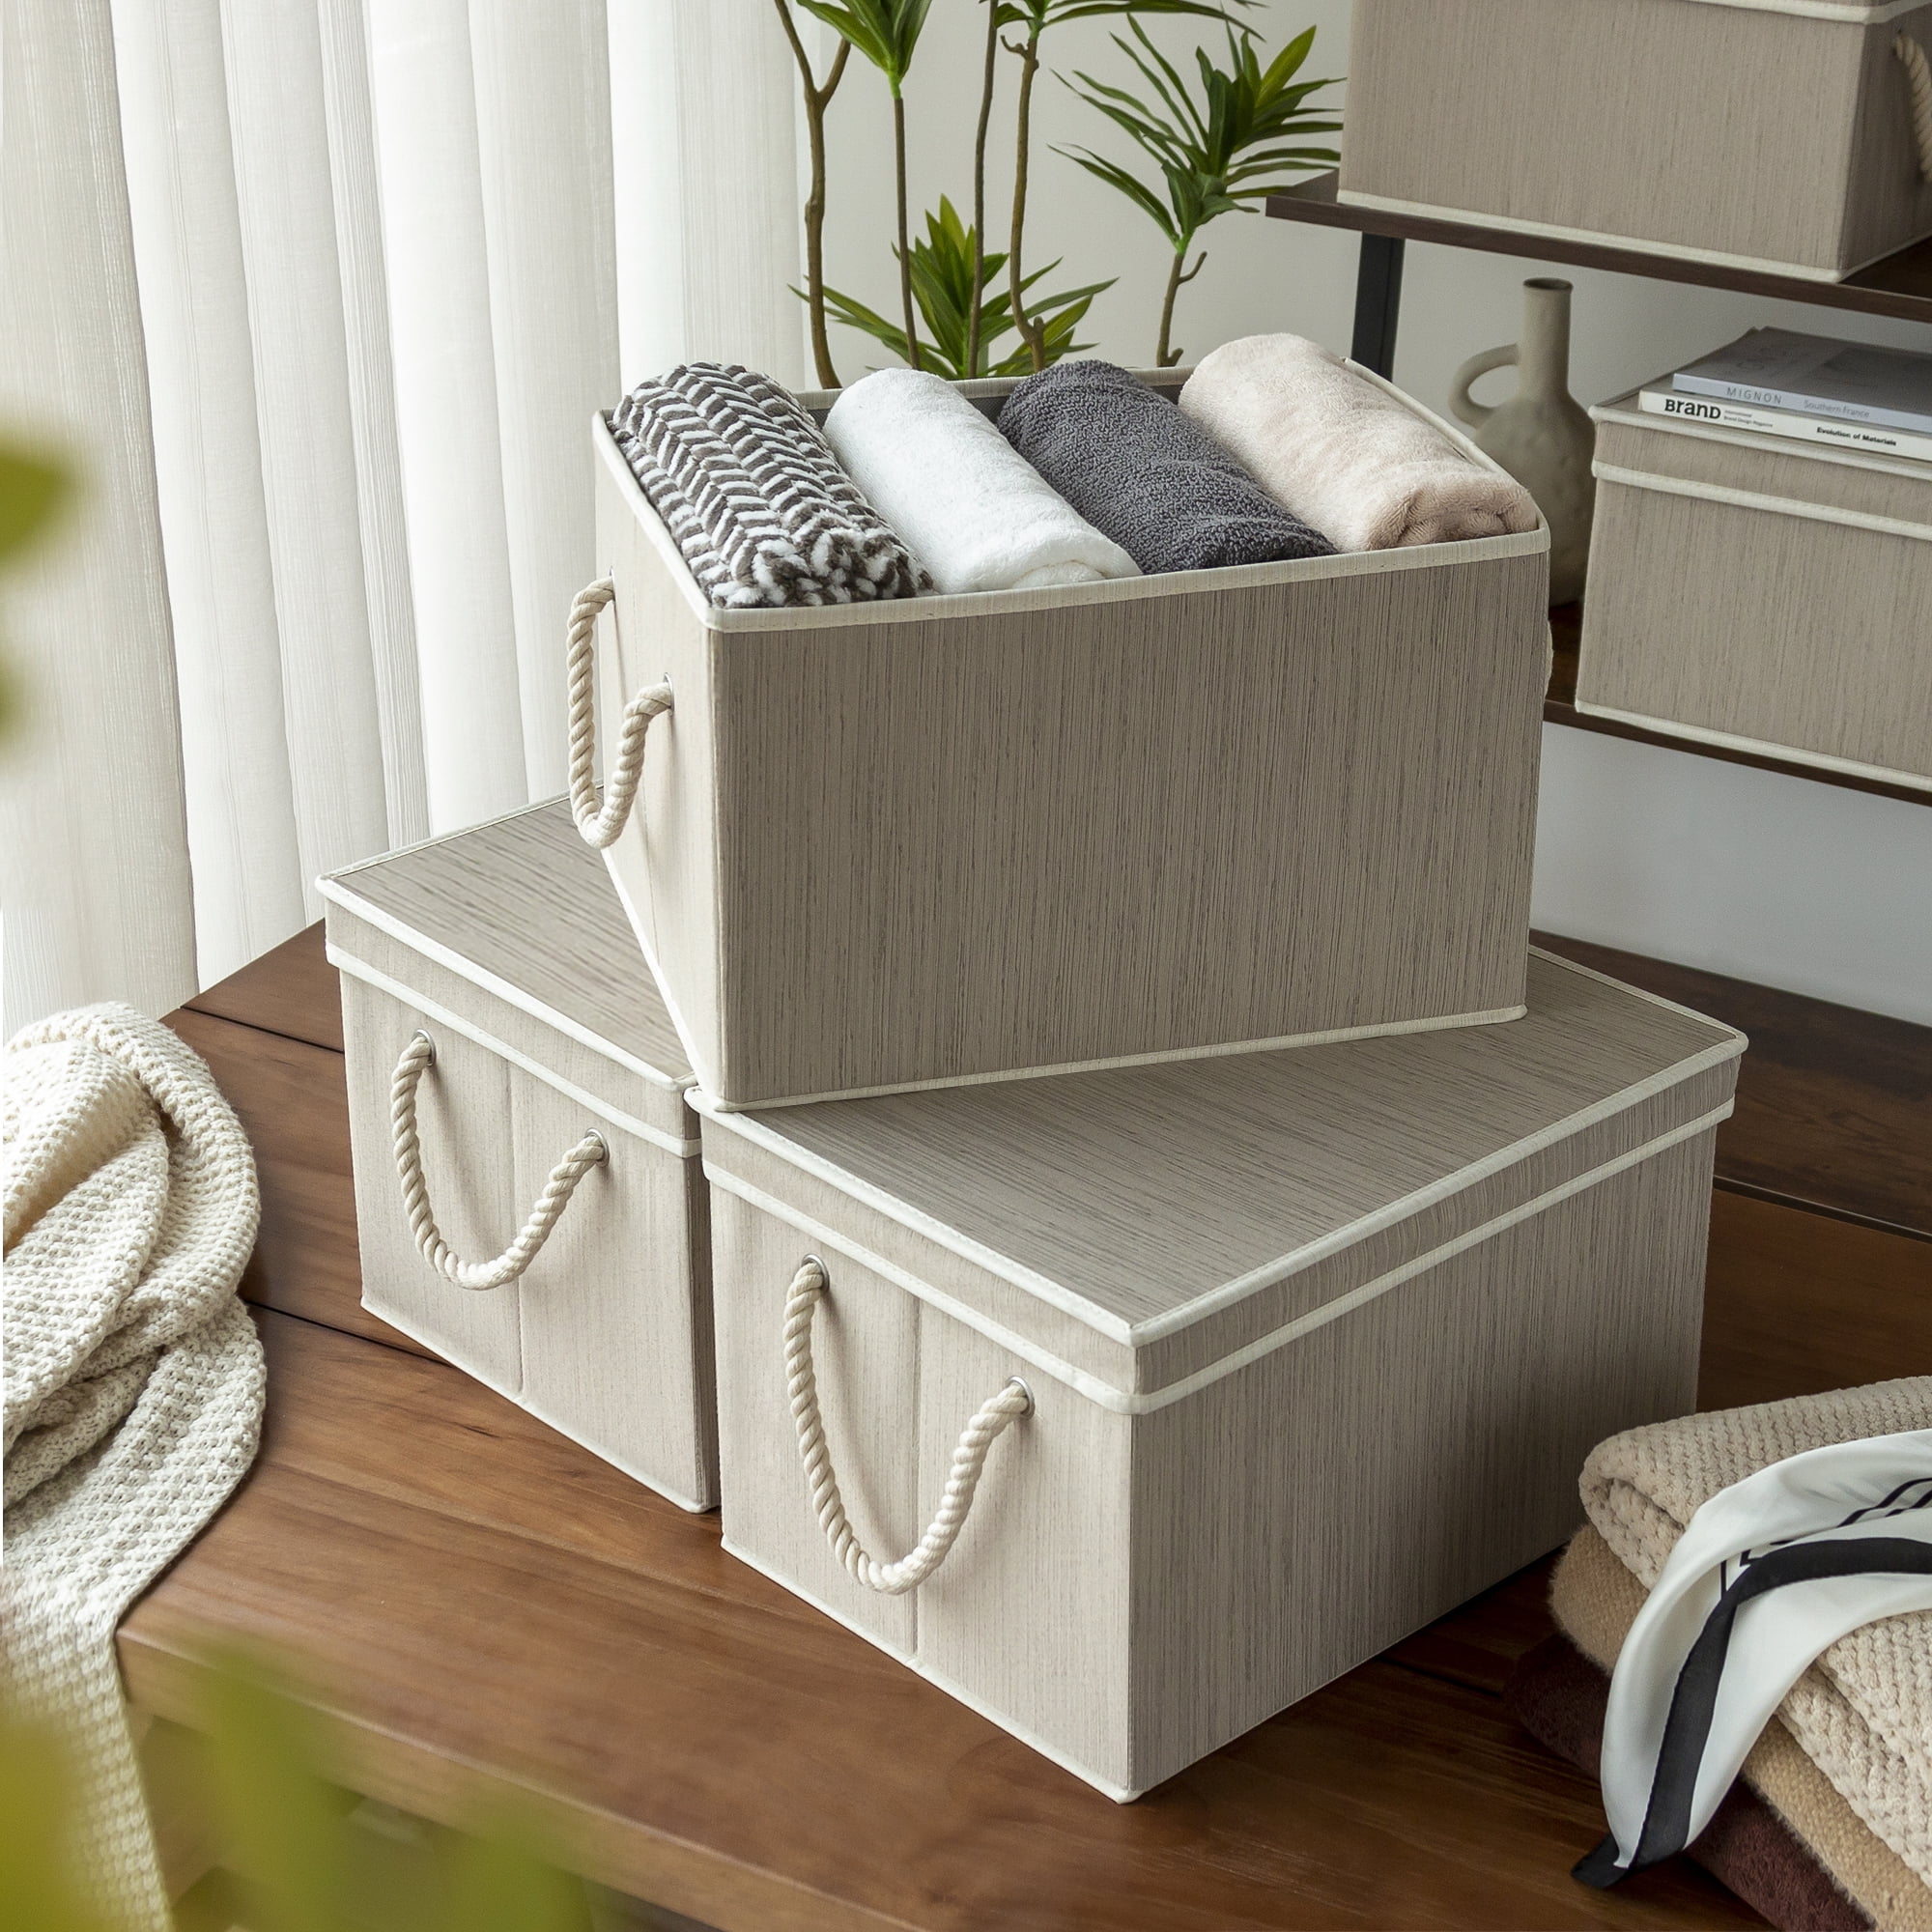 TYEERS Large Collapsible Storage Bins with Lids, Patterns